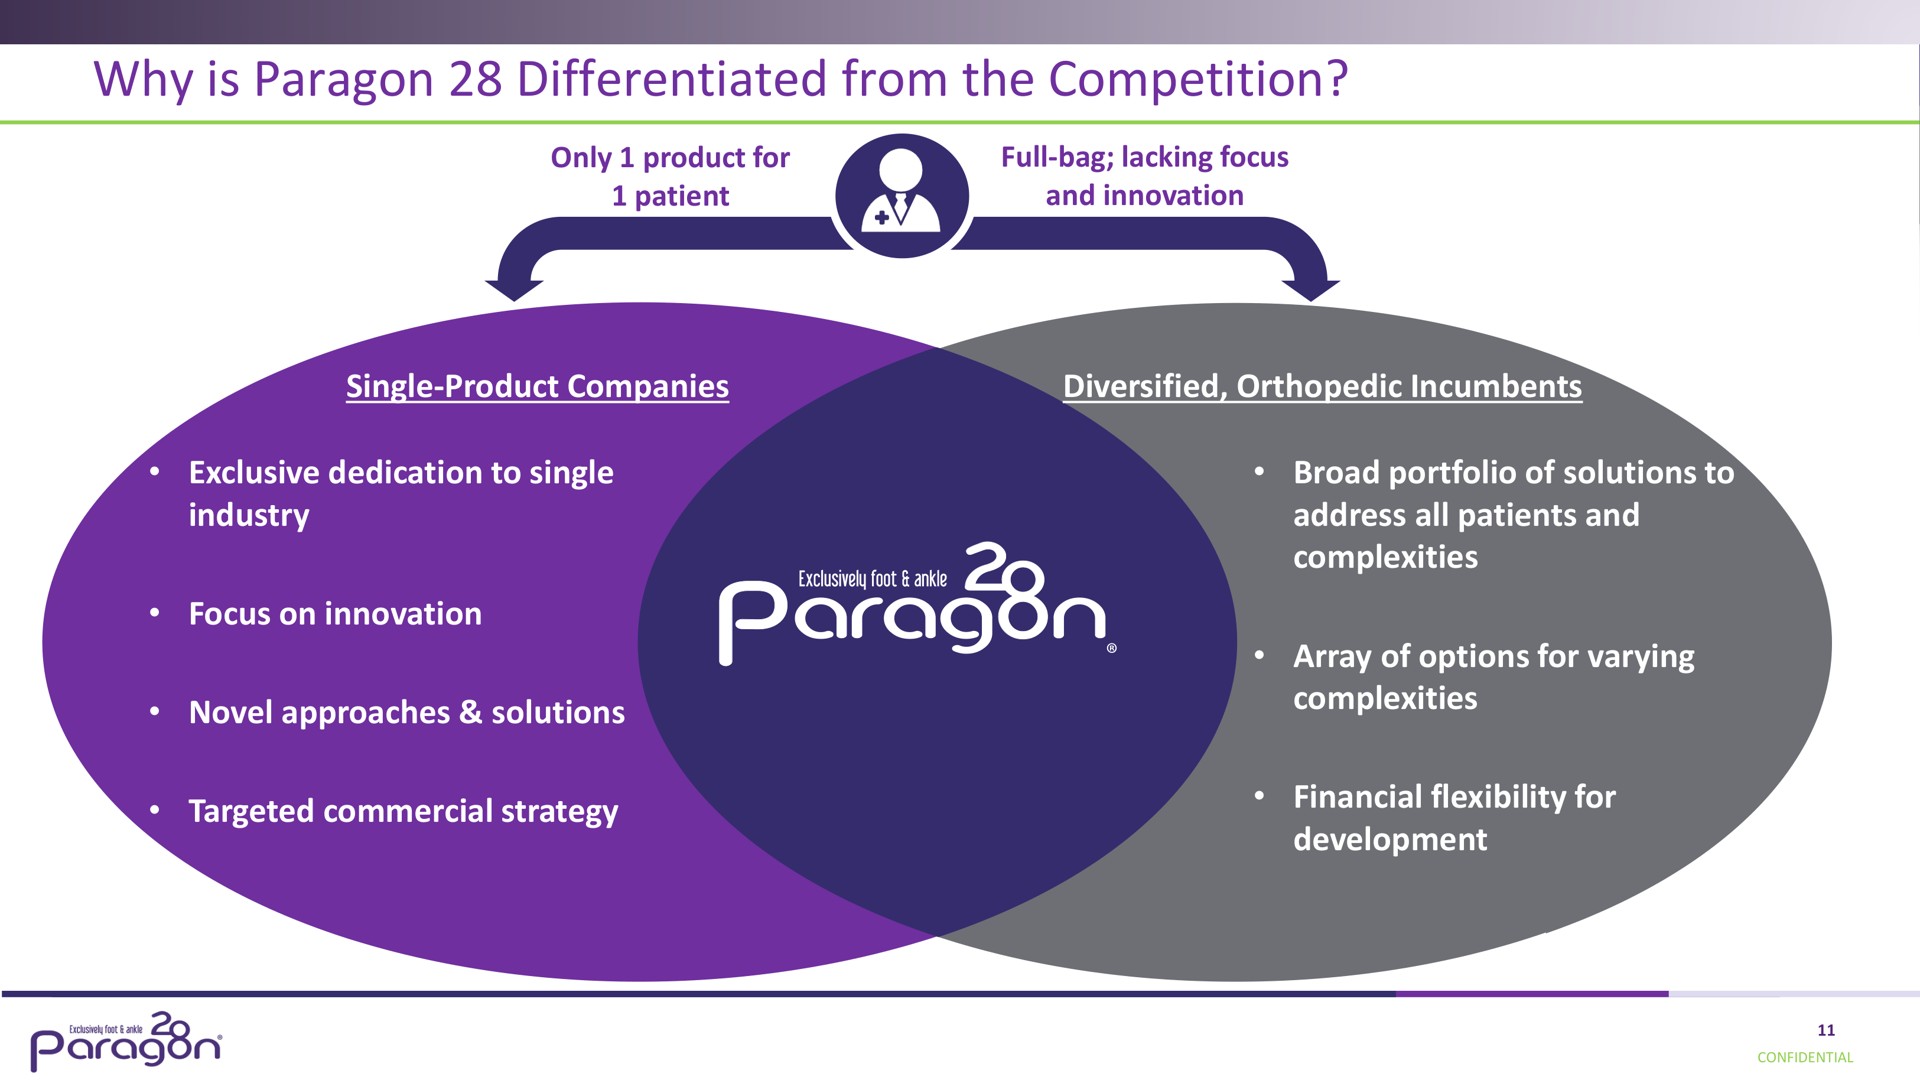 why is paragon differentiated from the competition | Paragon28